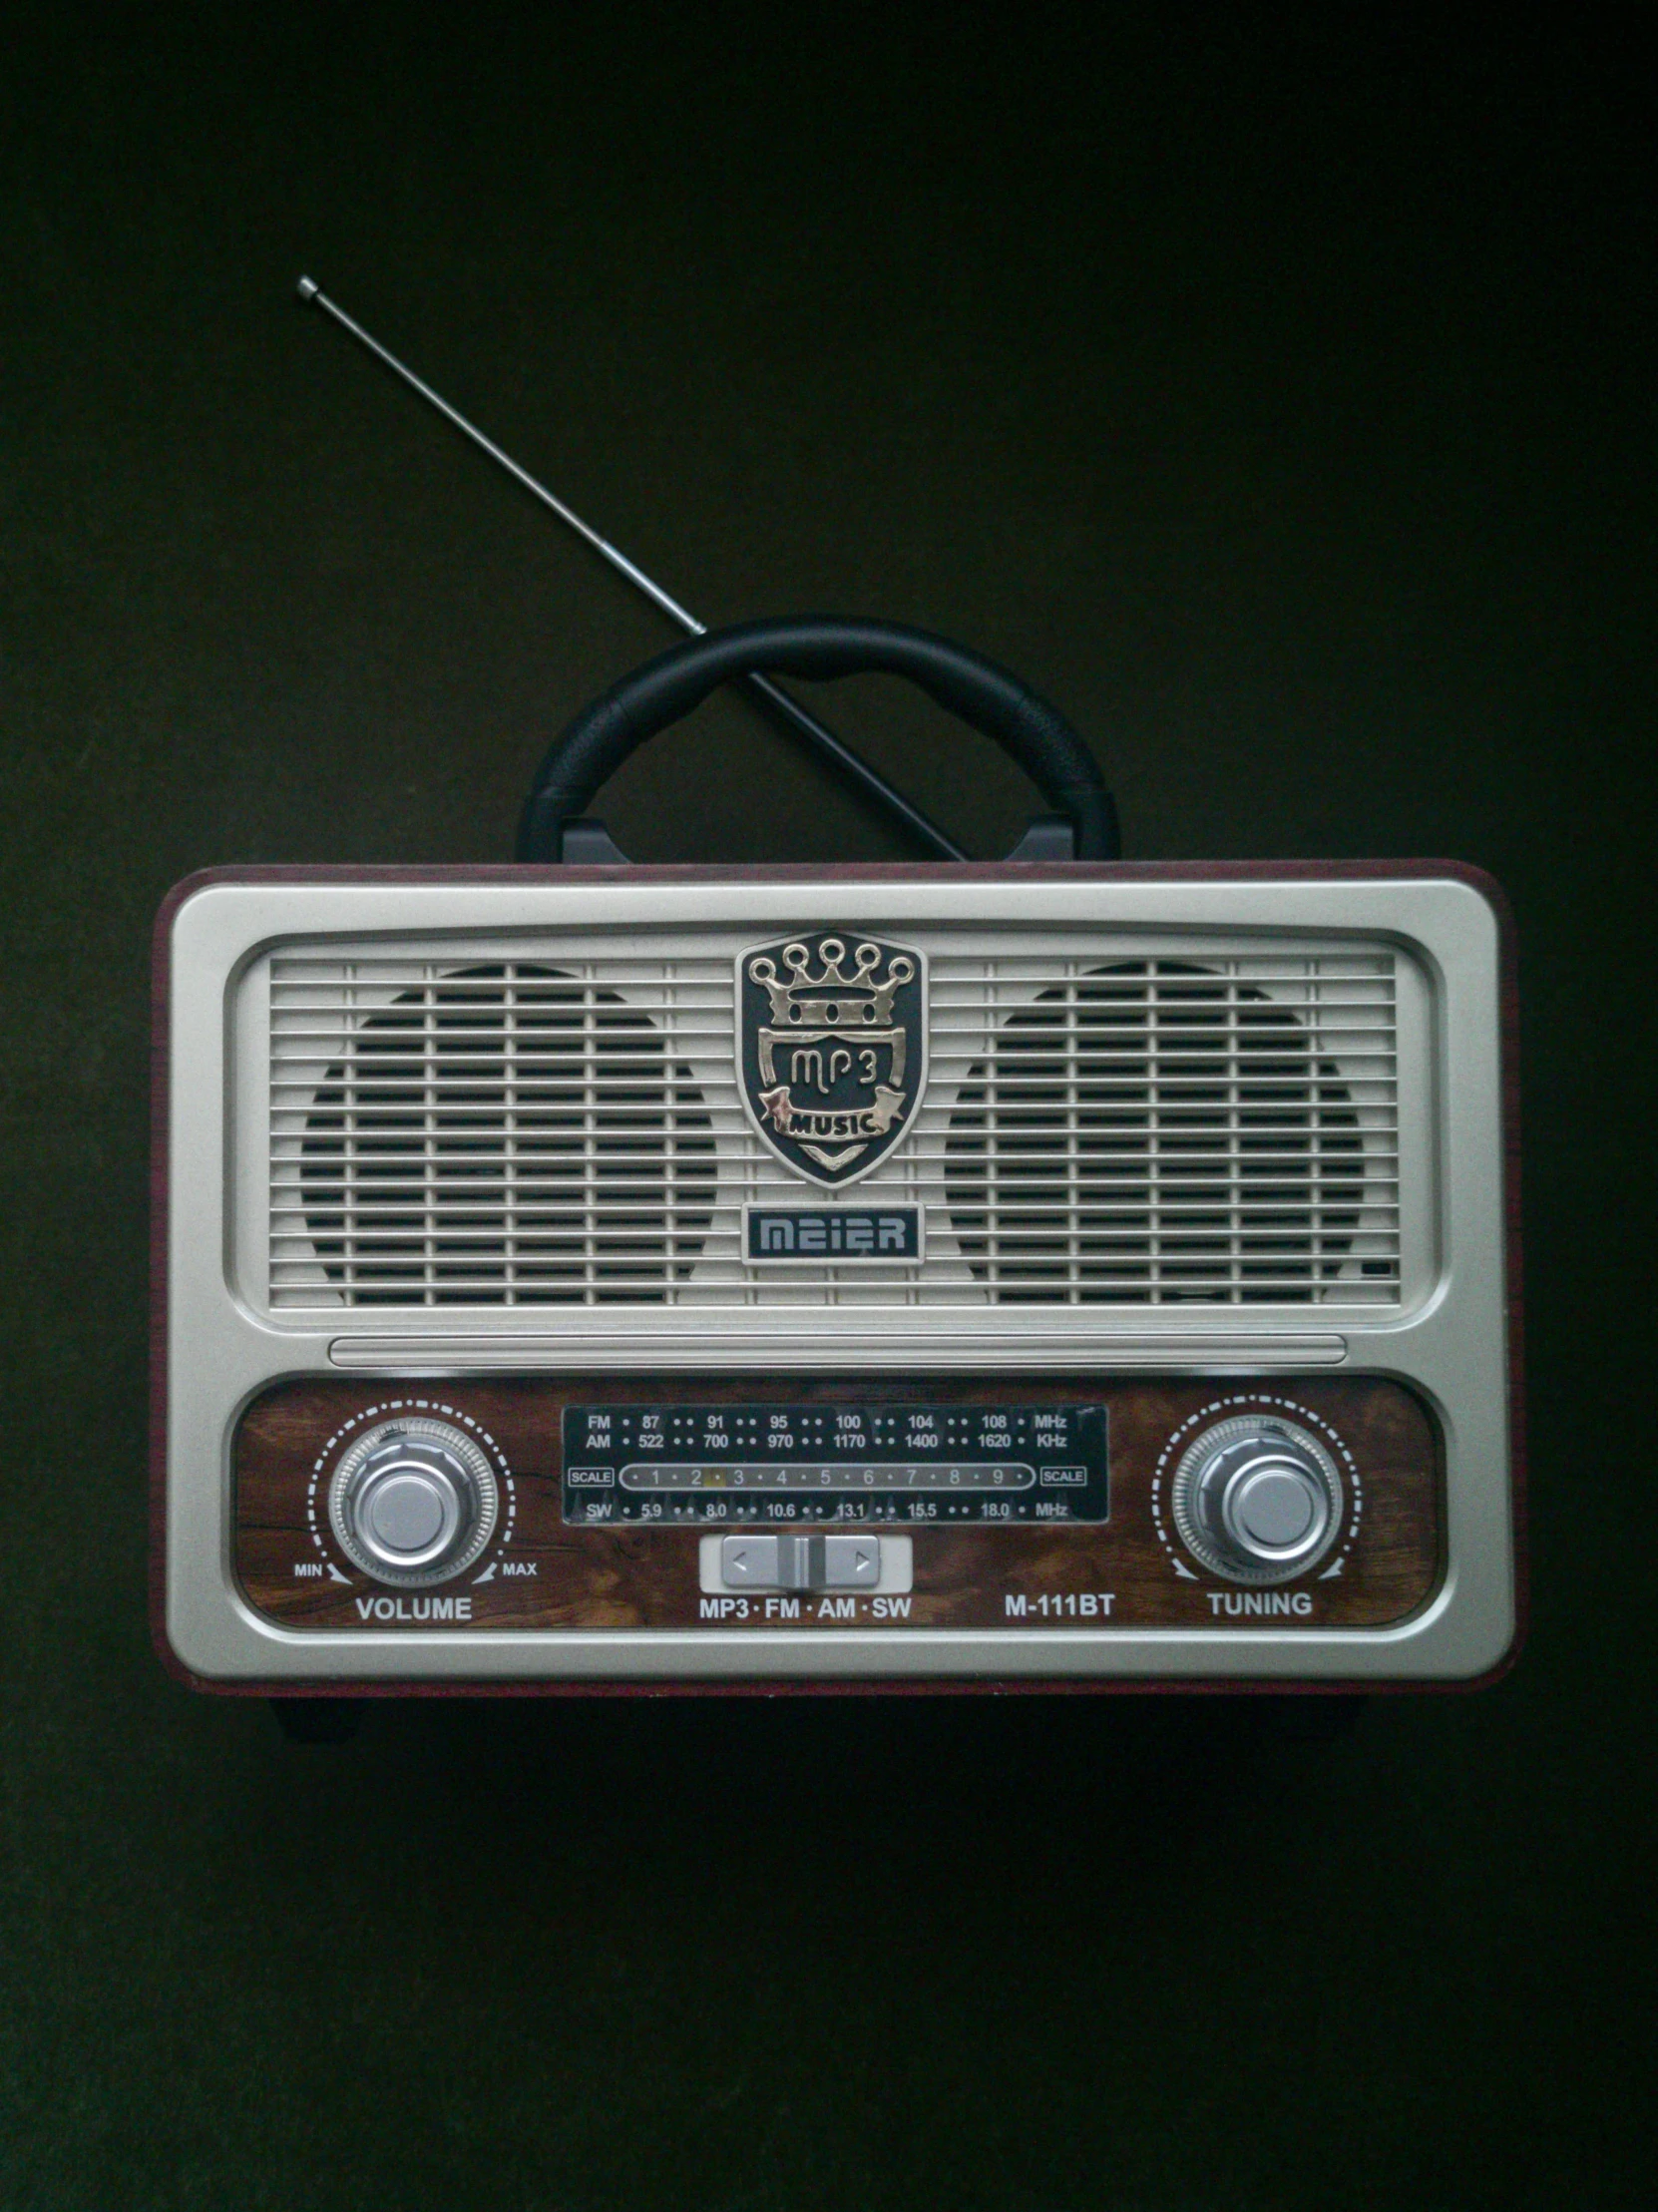 an old radio with antenna that is not working